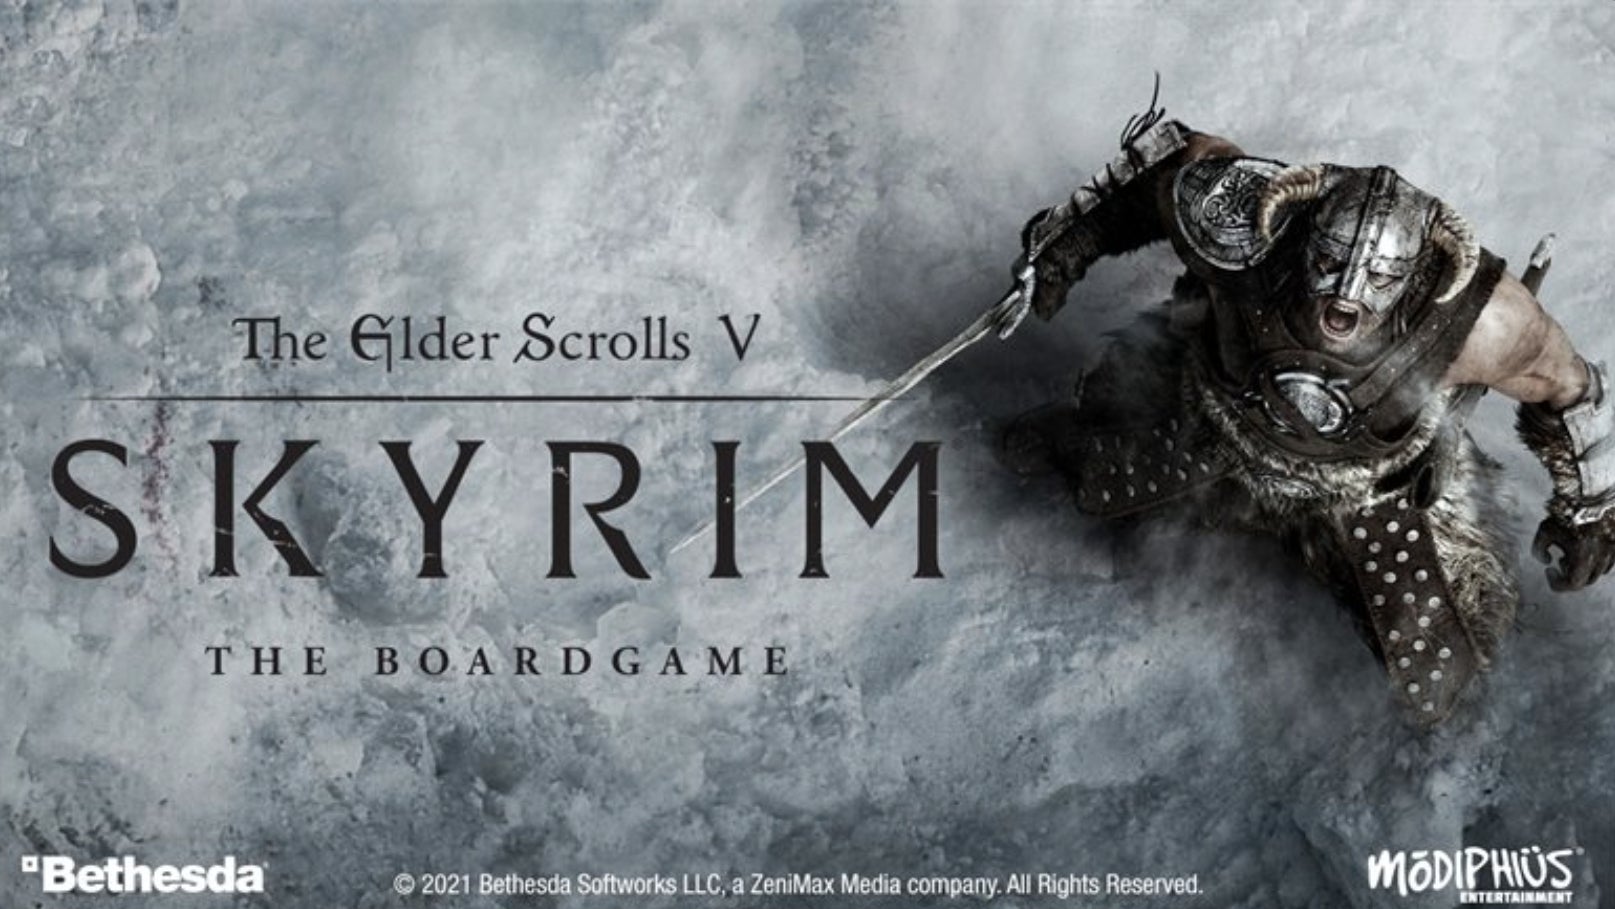 There's a Skyrim 